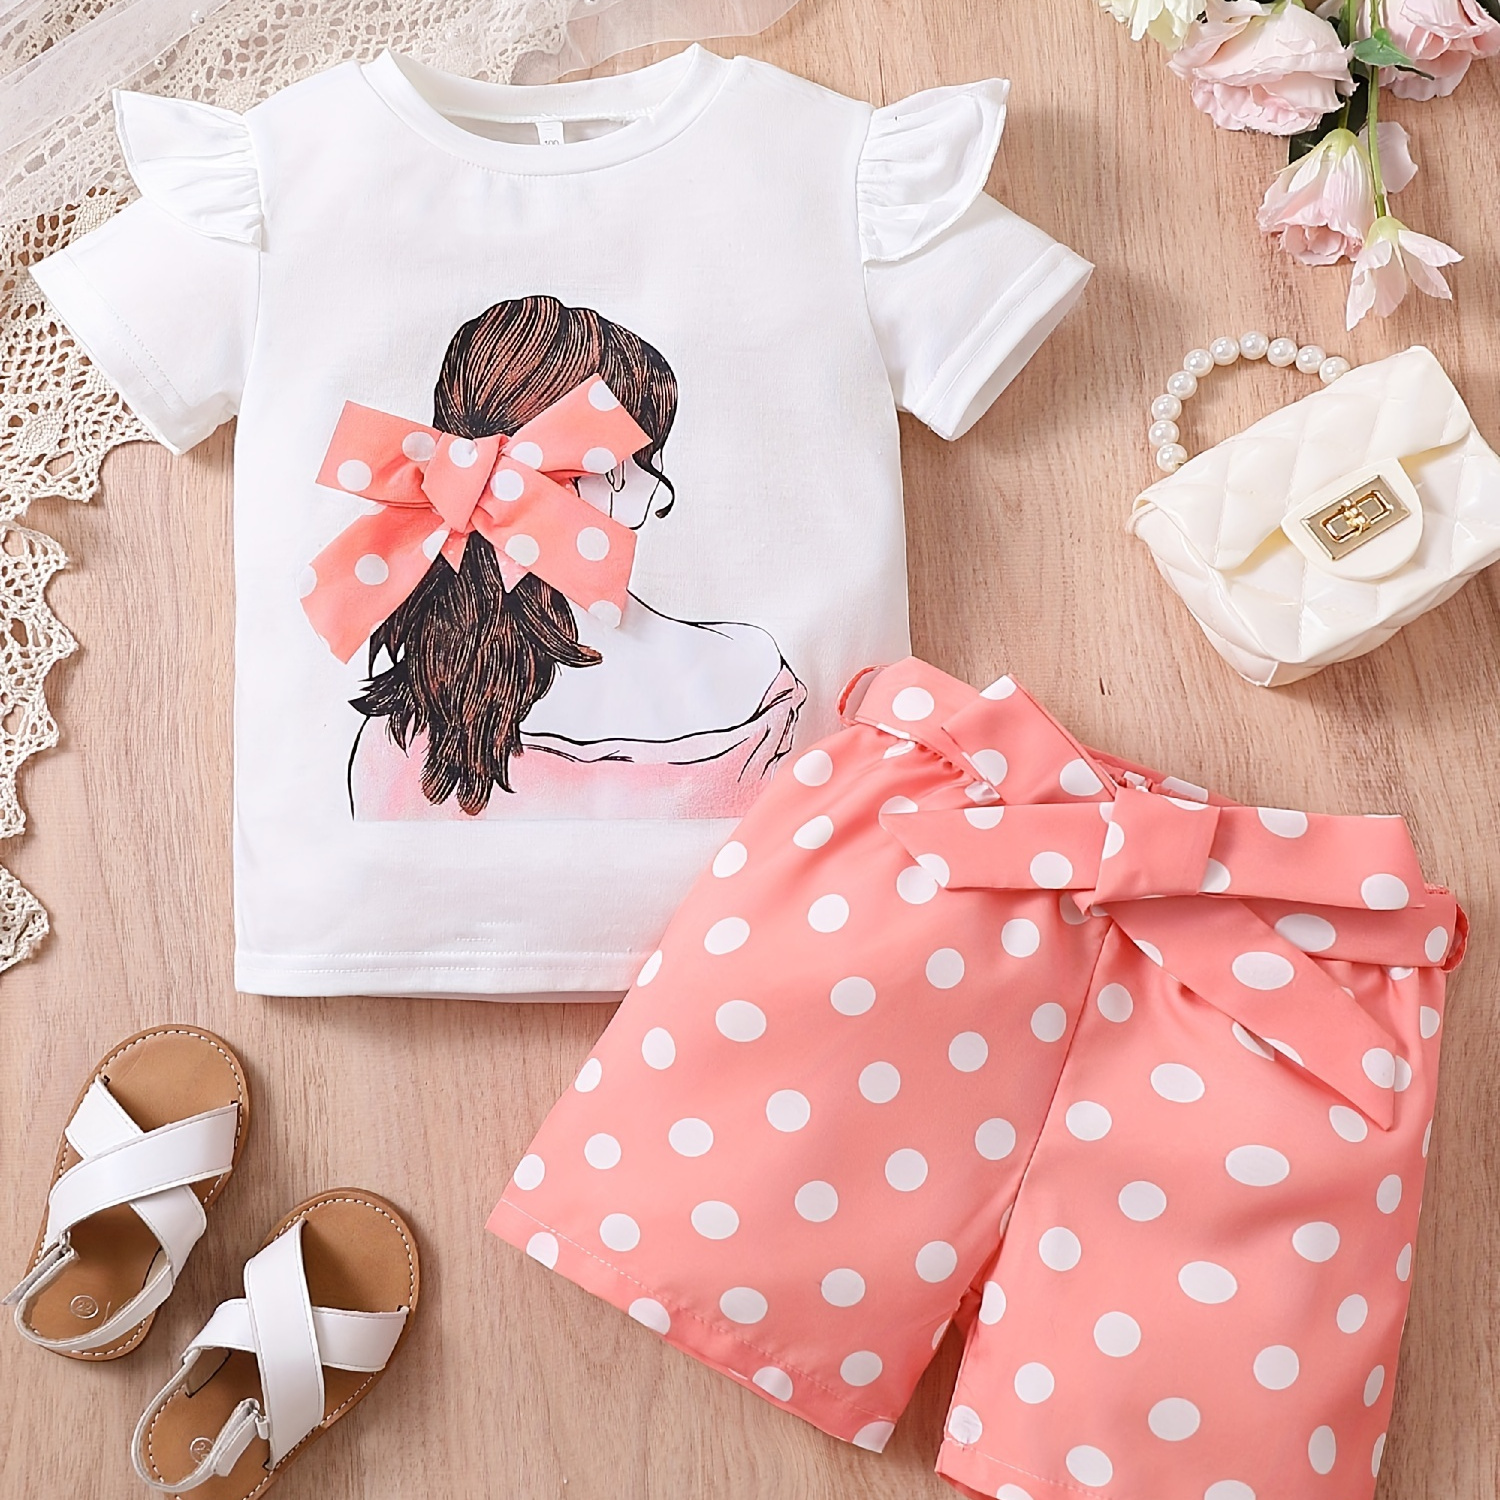 

2pcs Toddler Girls Bow Figure Graphic Ruffle Trim T-shirt Tops & Polka Dot Graphic Belted Shorts Set Kids Summer Clothes